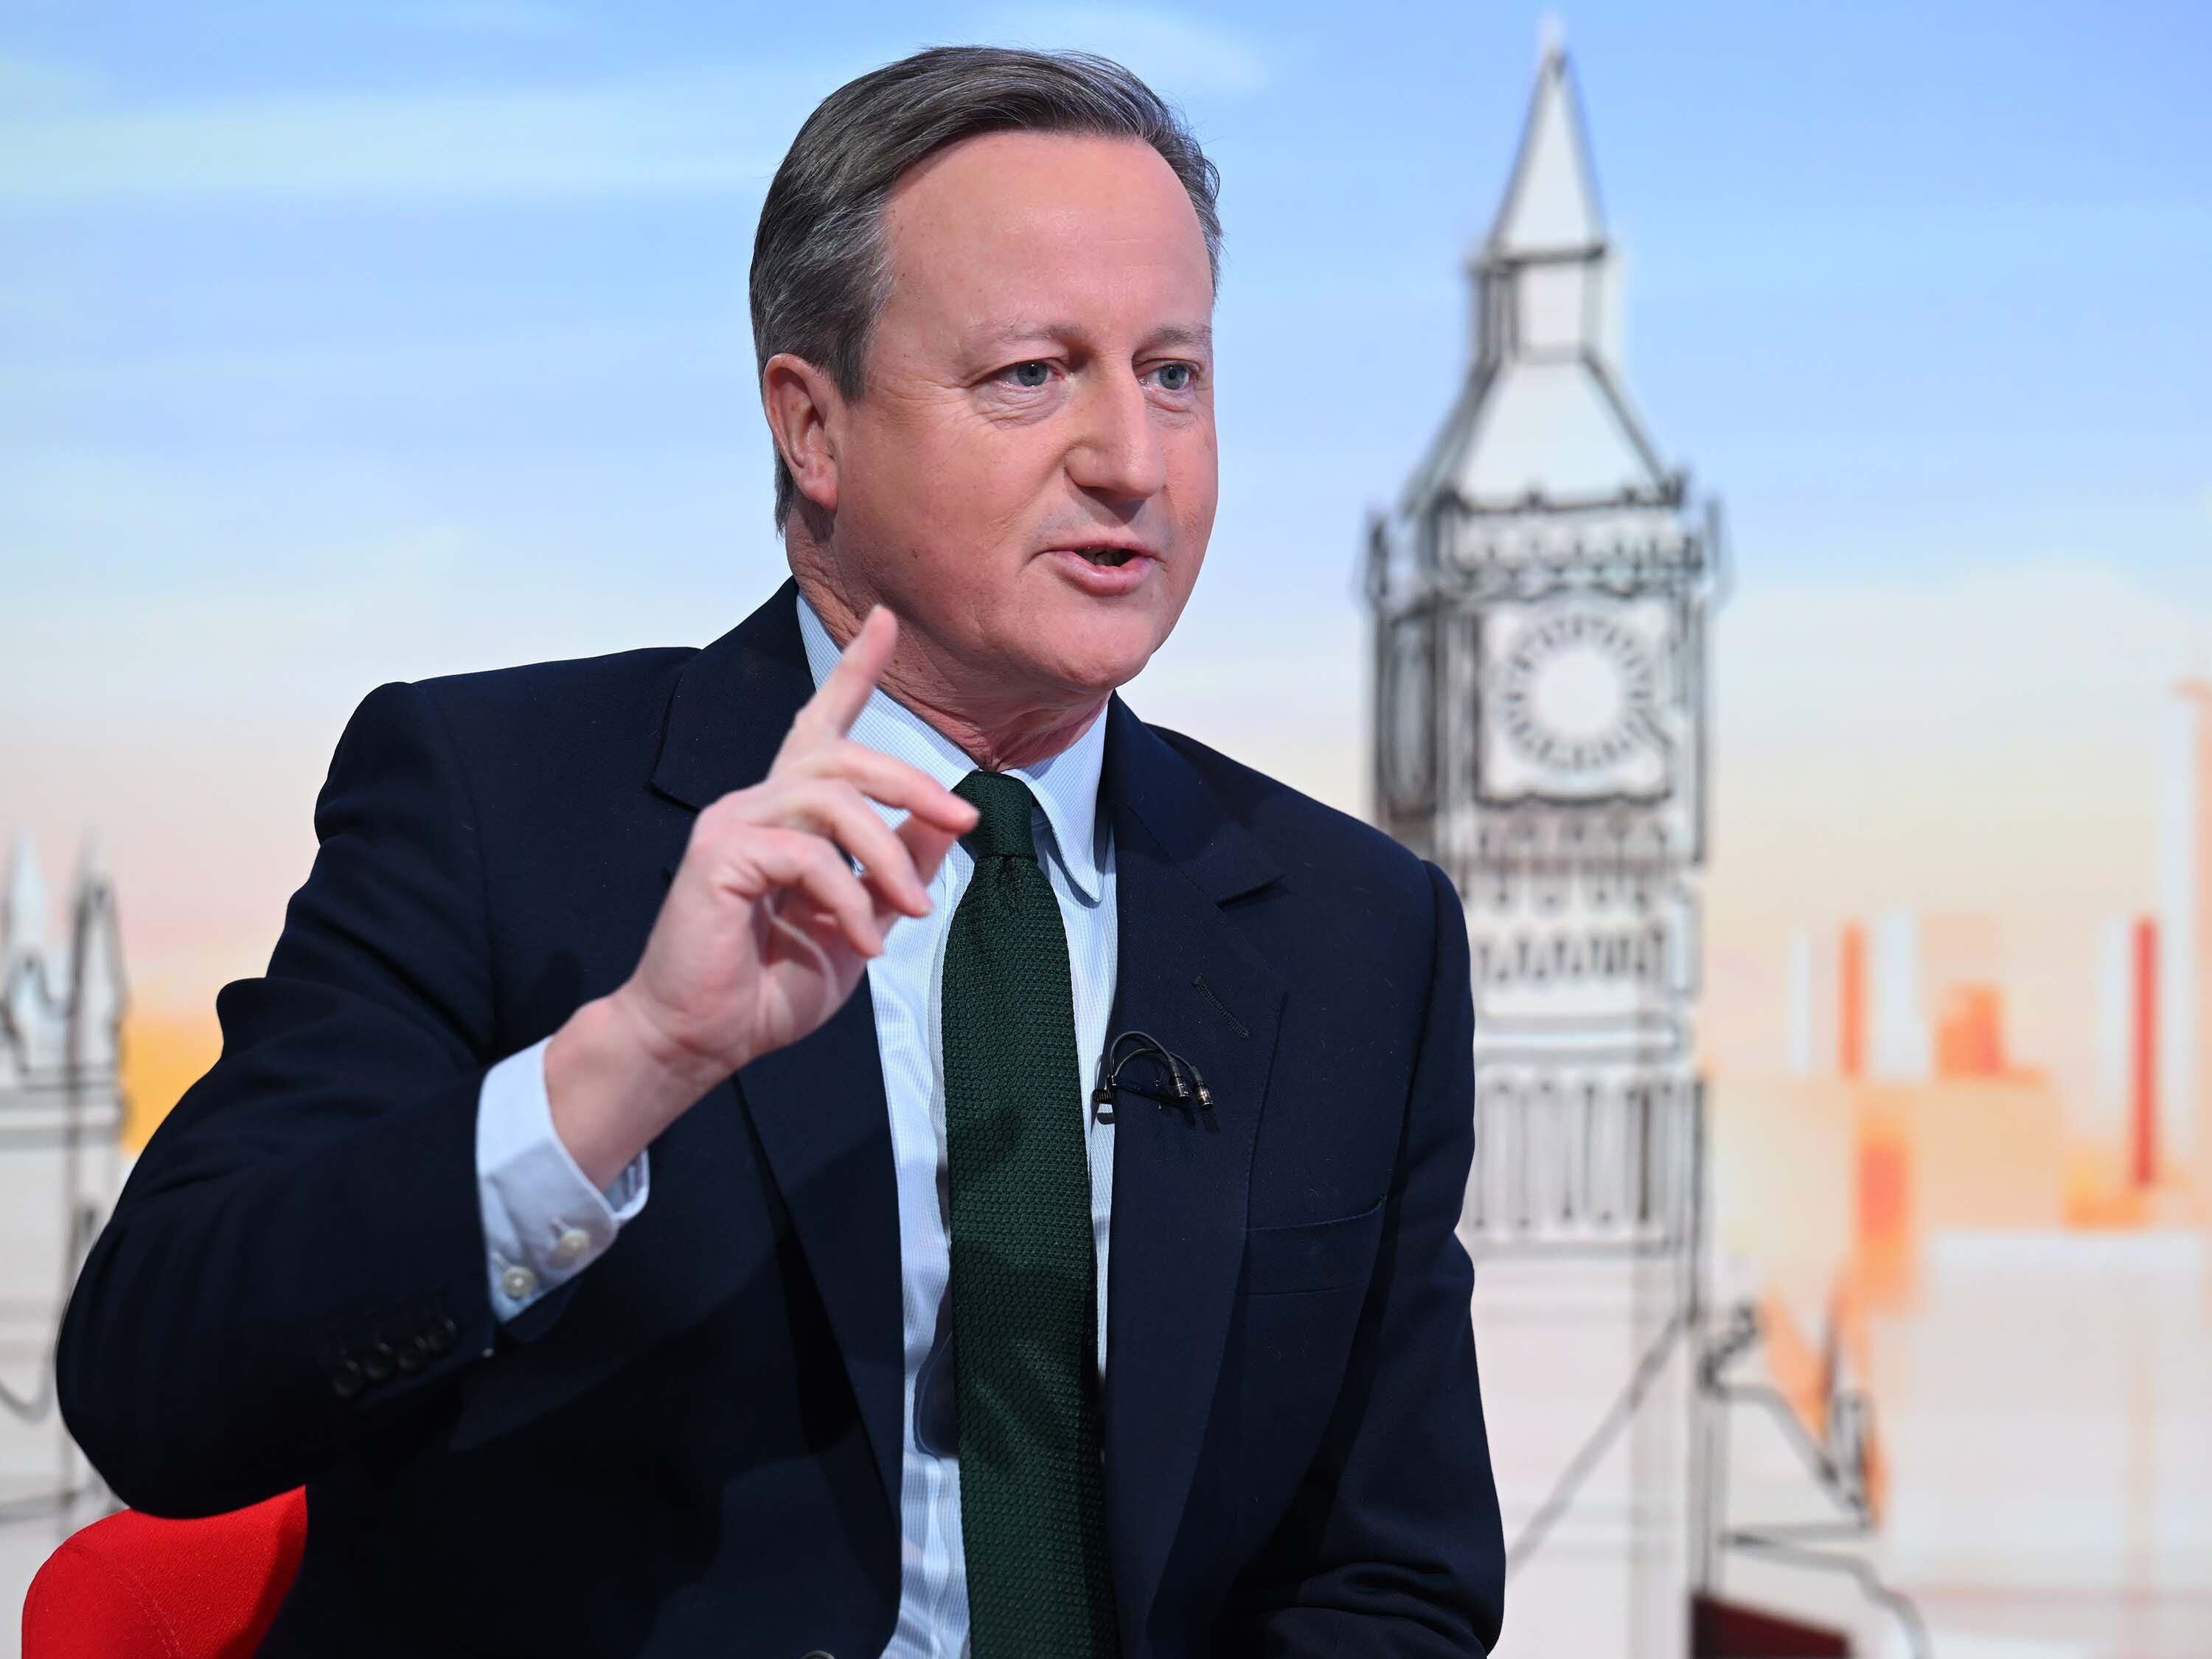 David Cameron says he is not ‘after any other role’ after his surprise return